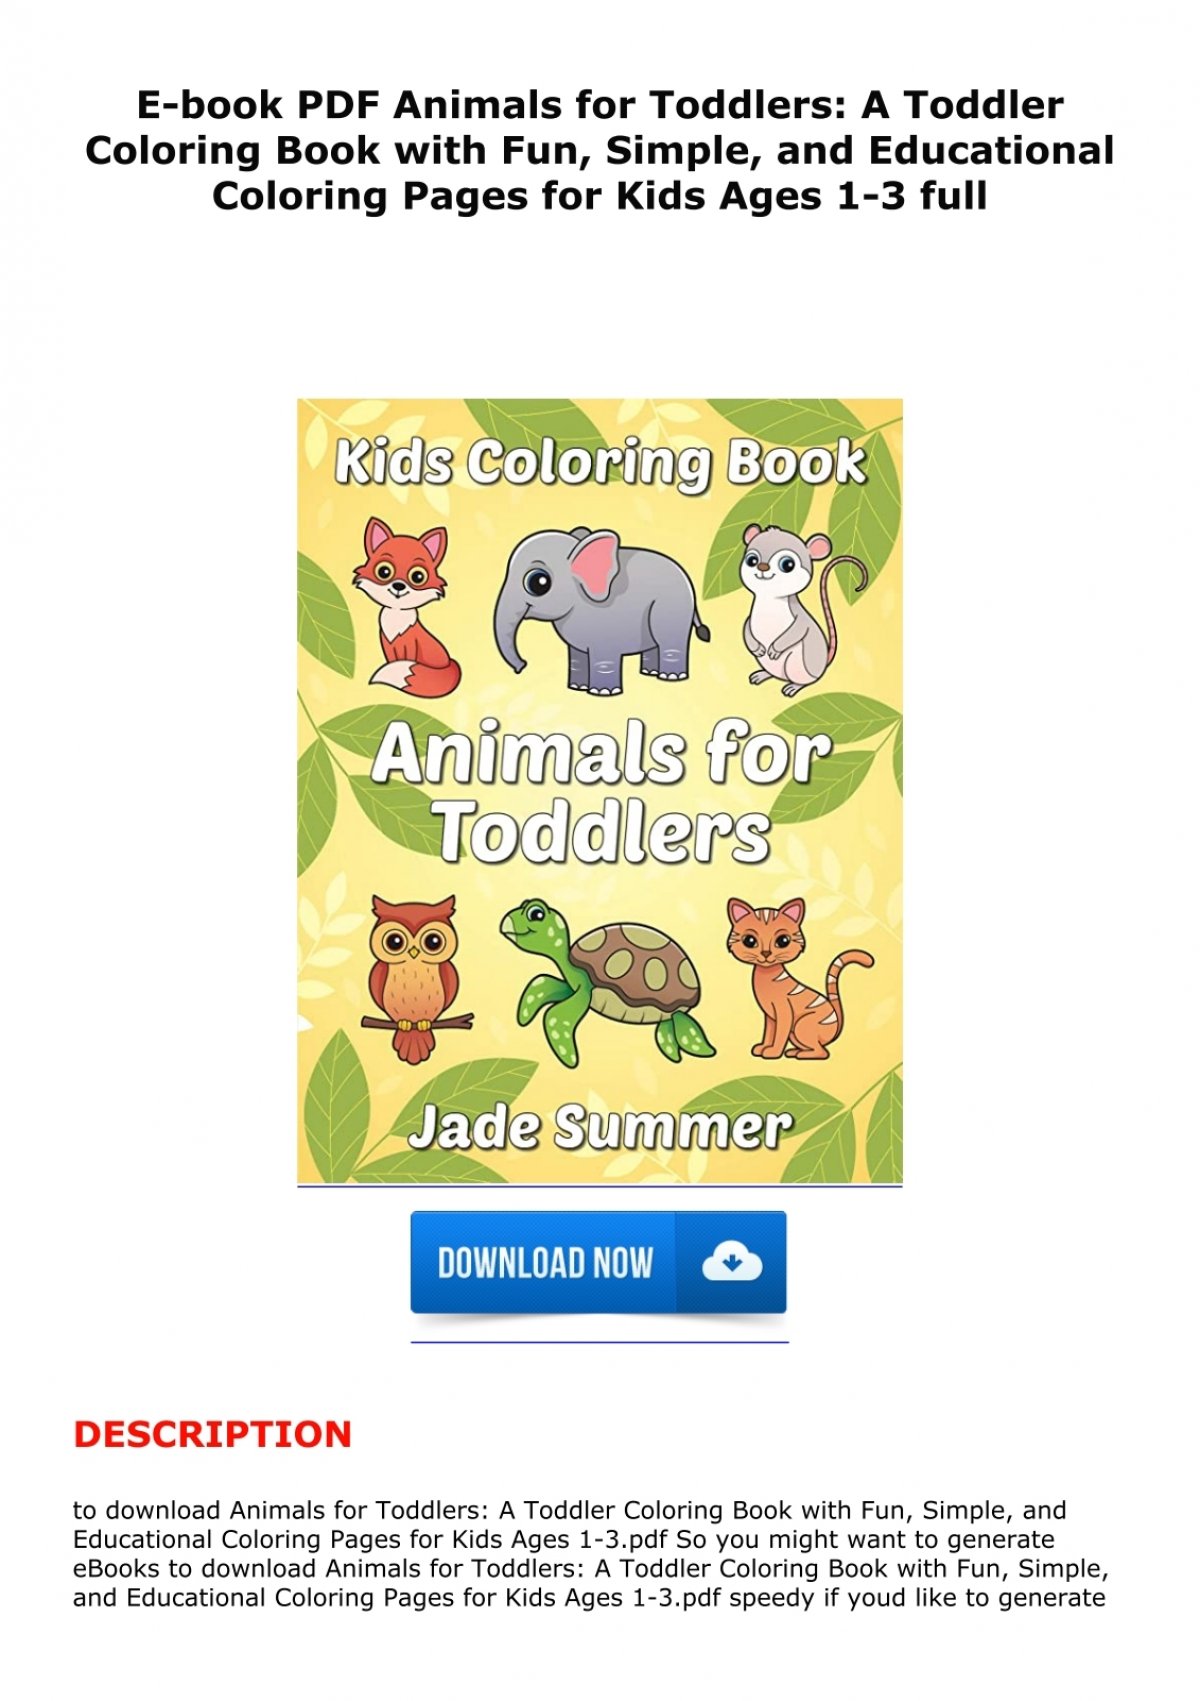 E Book Pdf Animals For Toddlers A Toddler Coloring Book With Fun Simple And Educational Coloring Pages For Kids Ages 1 3 Full